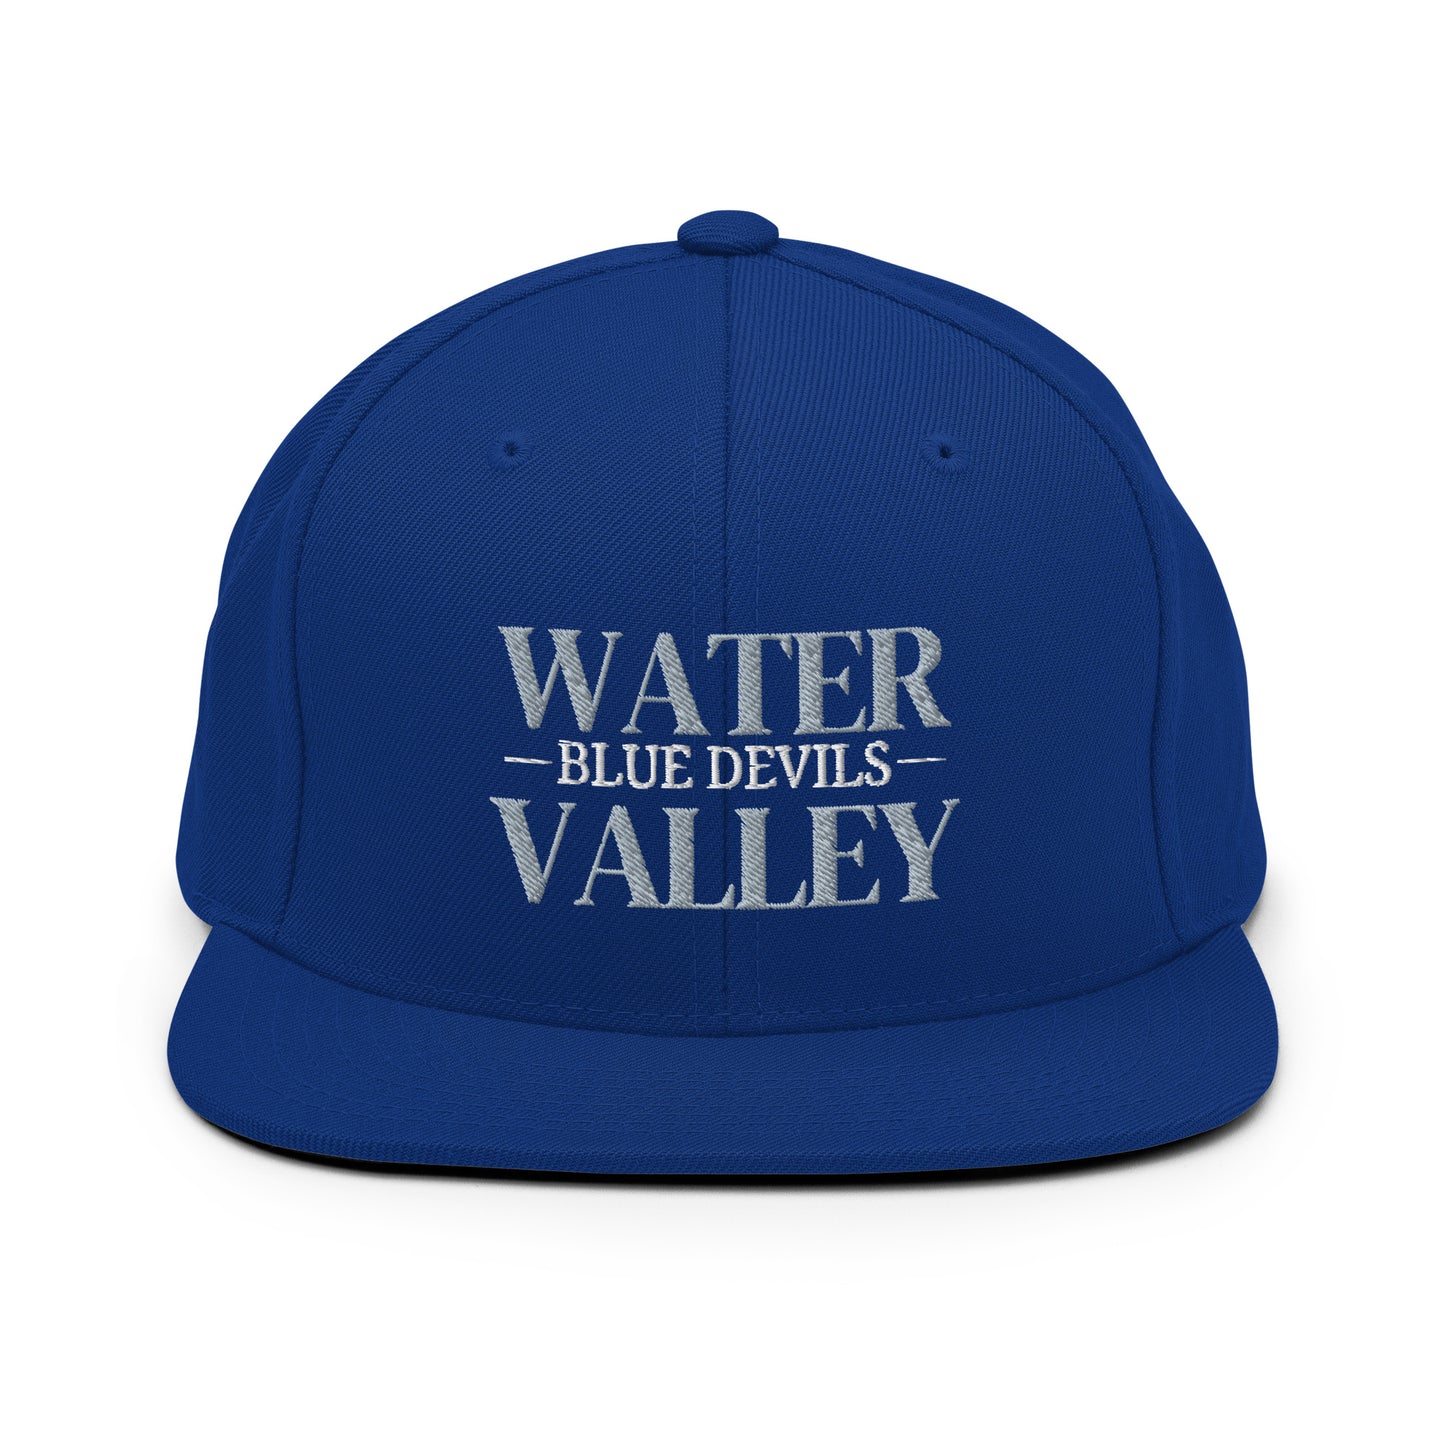 Water Valley Blue Devils Snapback Flat Bill Embroidered Hat